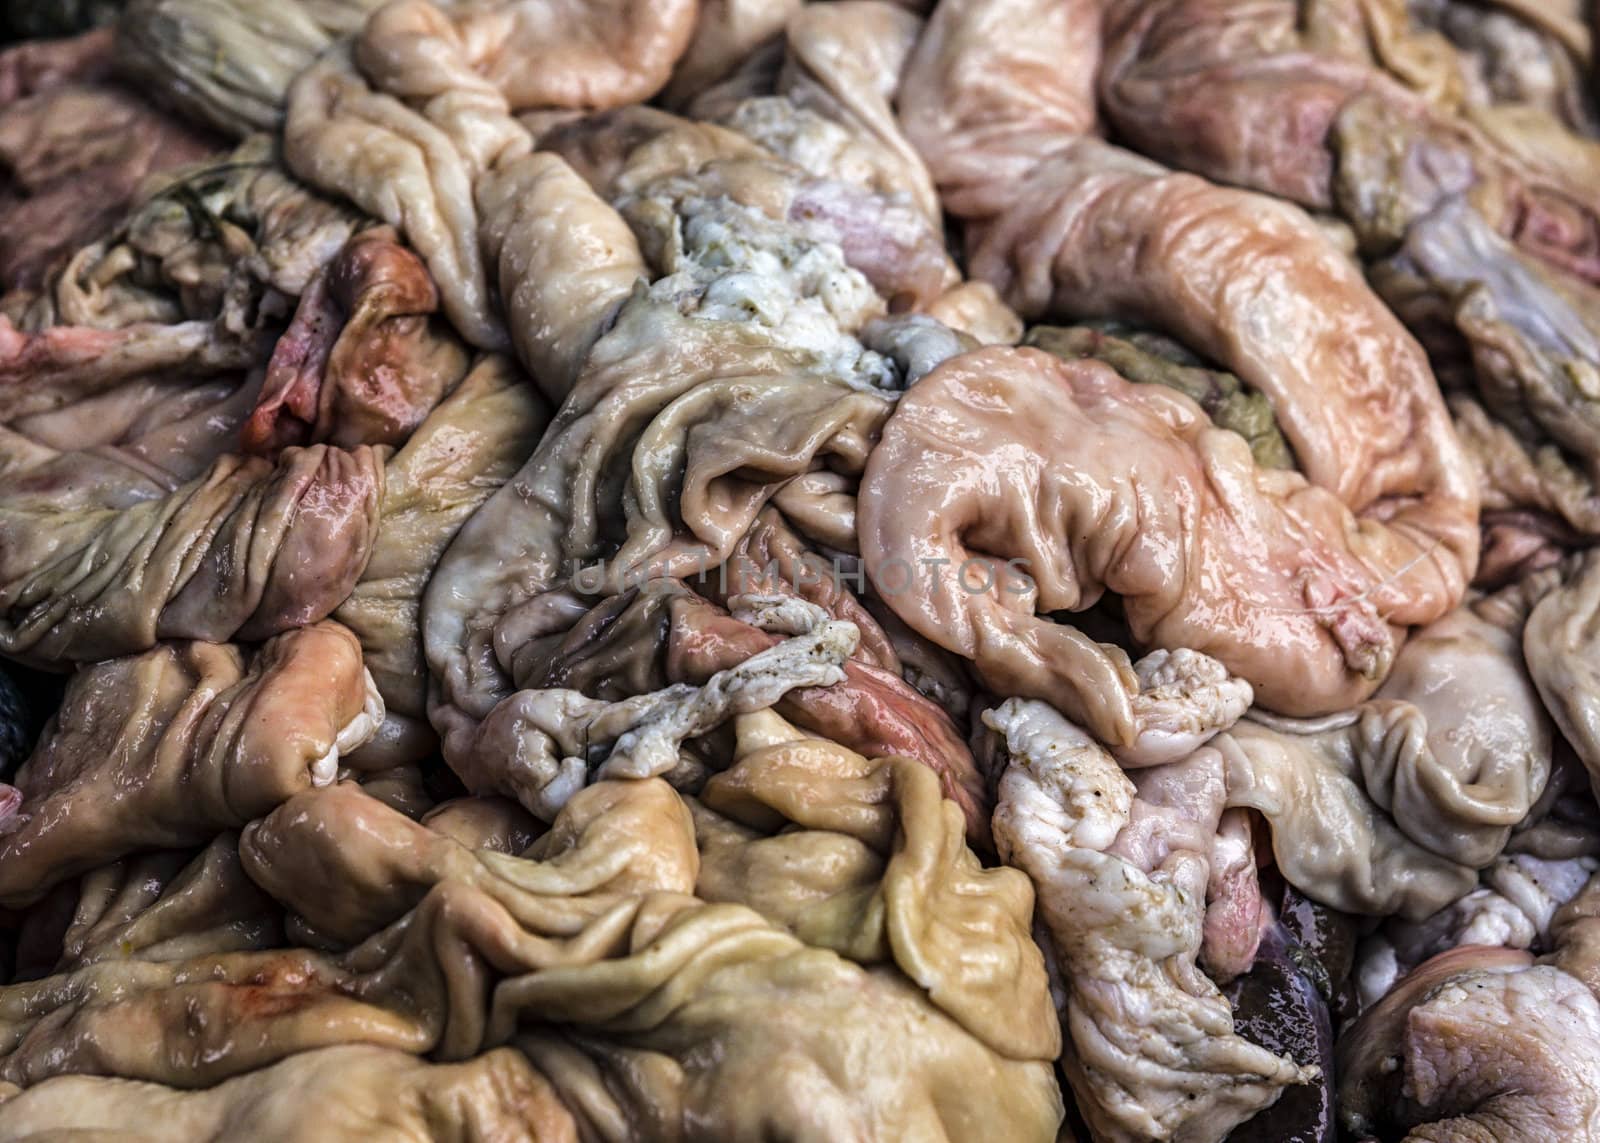 Disgusting scene of animal intestines. by Claudine